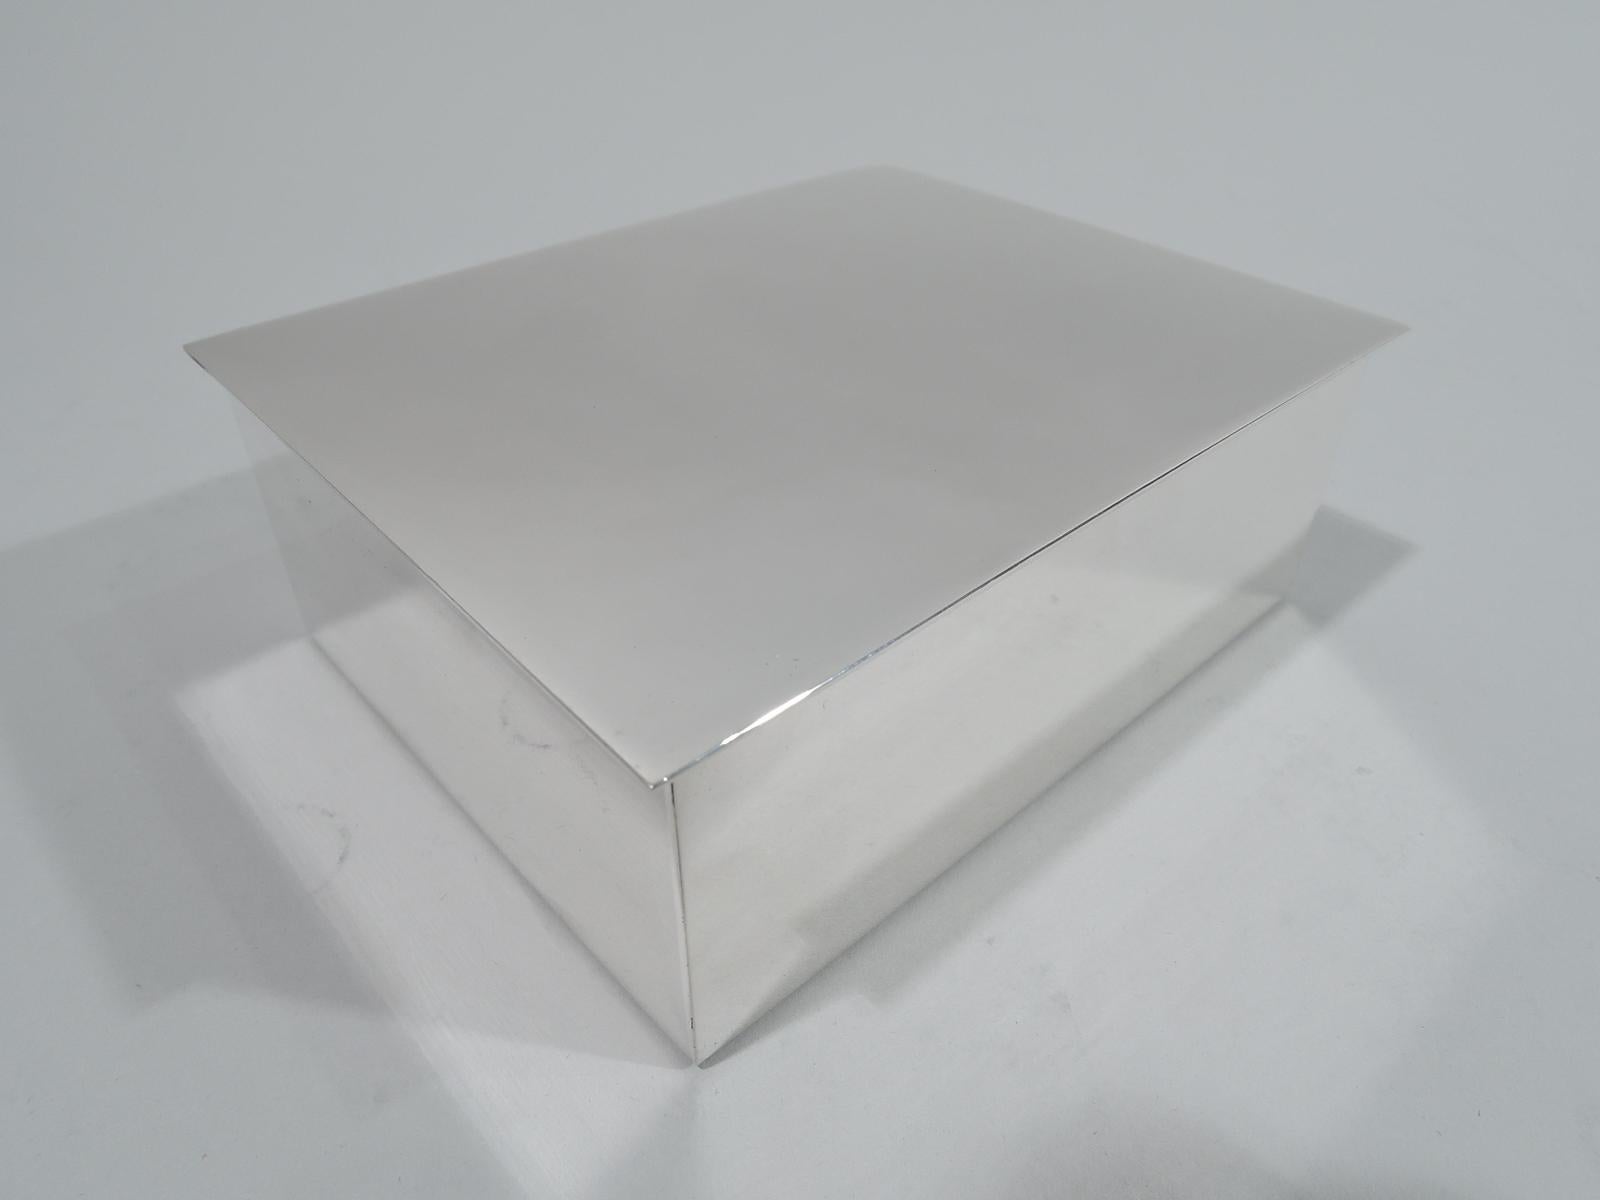 Mid-Century Modern sterling silver box. Made by Tiffany & Co. in New York. Rectangular with straight sides. Cover flat, hinged, and overhanging. Box interior cedar lined. Fully marked including maker’s stamp, postwar pattern no. 23325, and